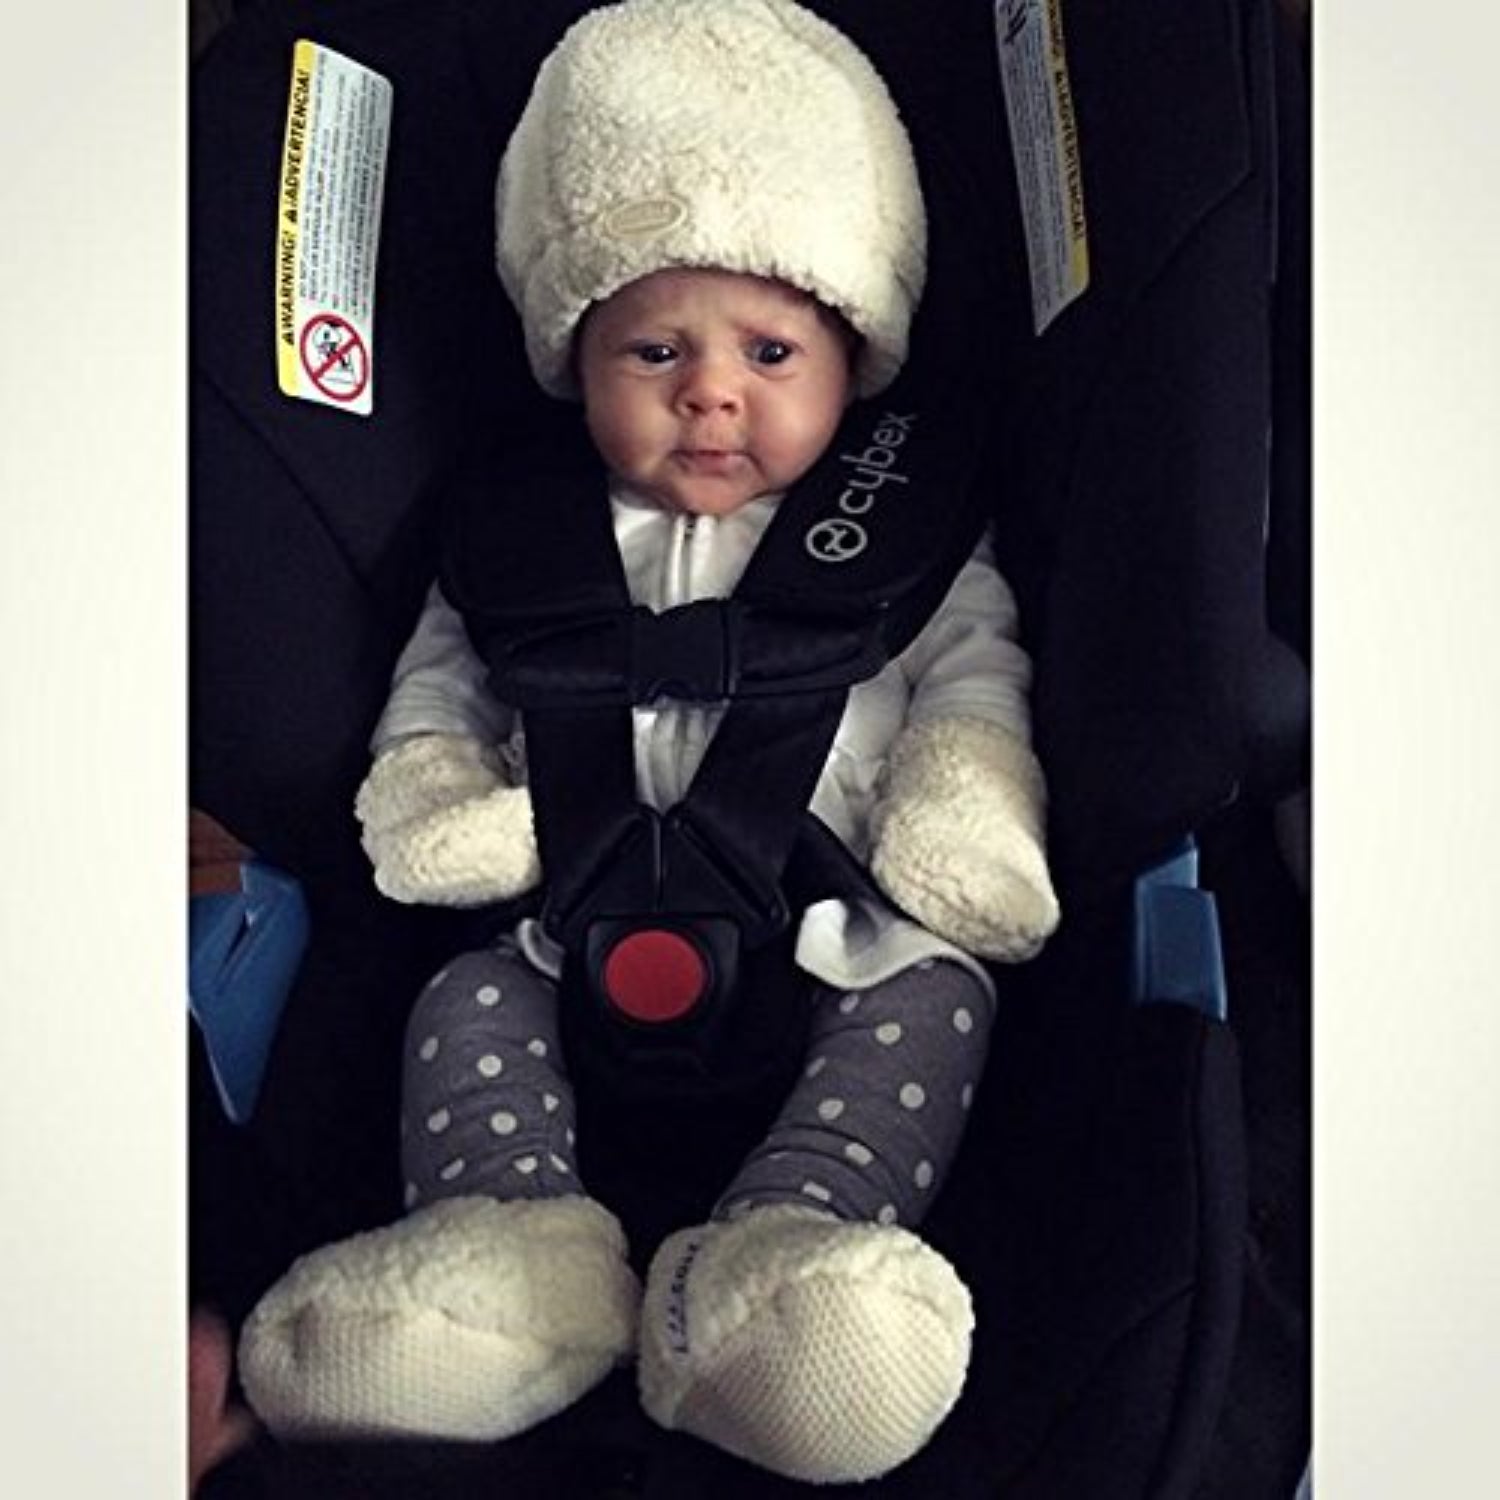 JJ Cole Bundle me Shearling Baby Hat, Mittens and Booties Set